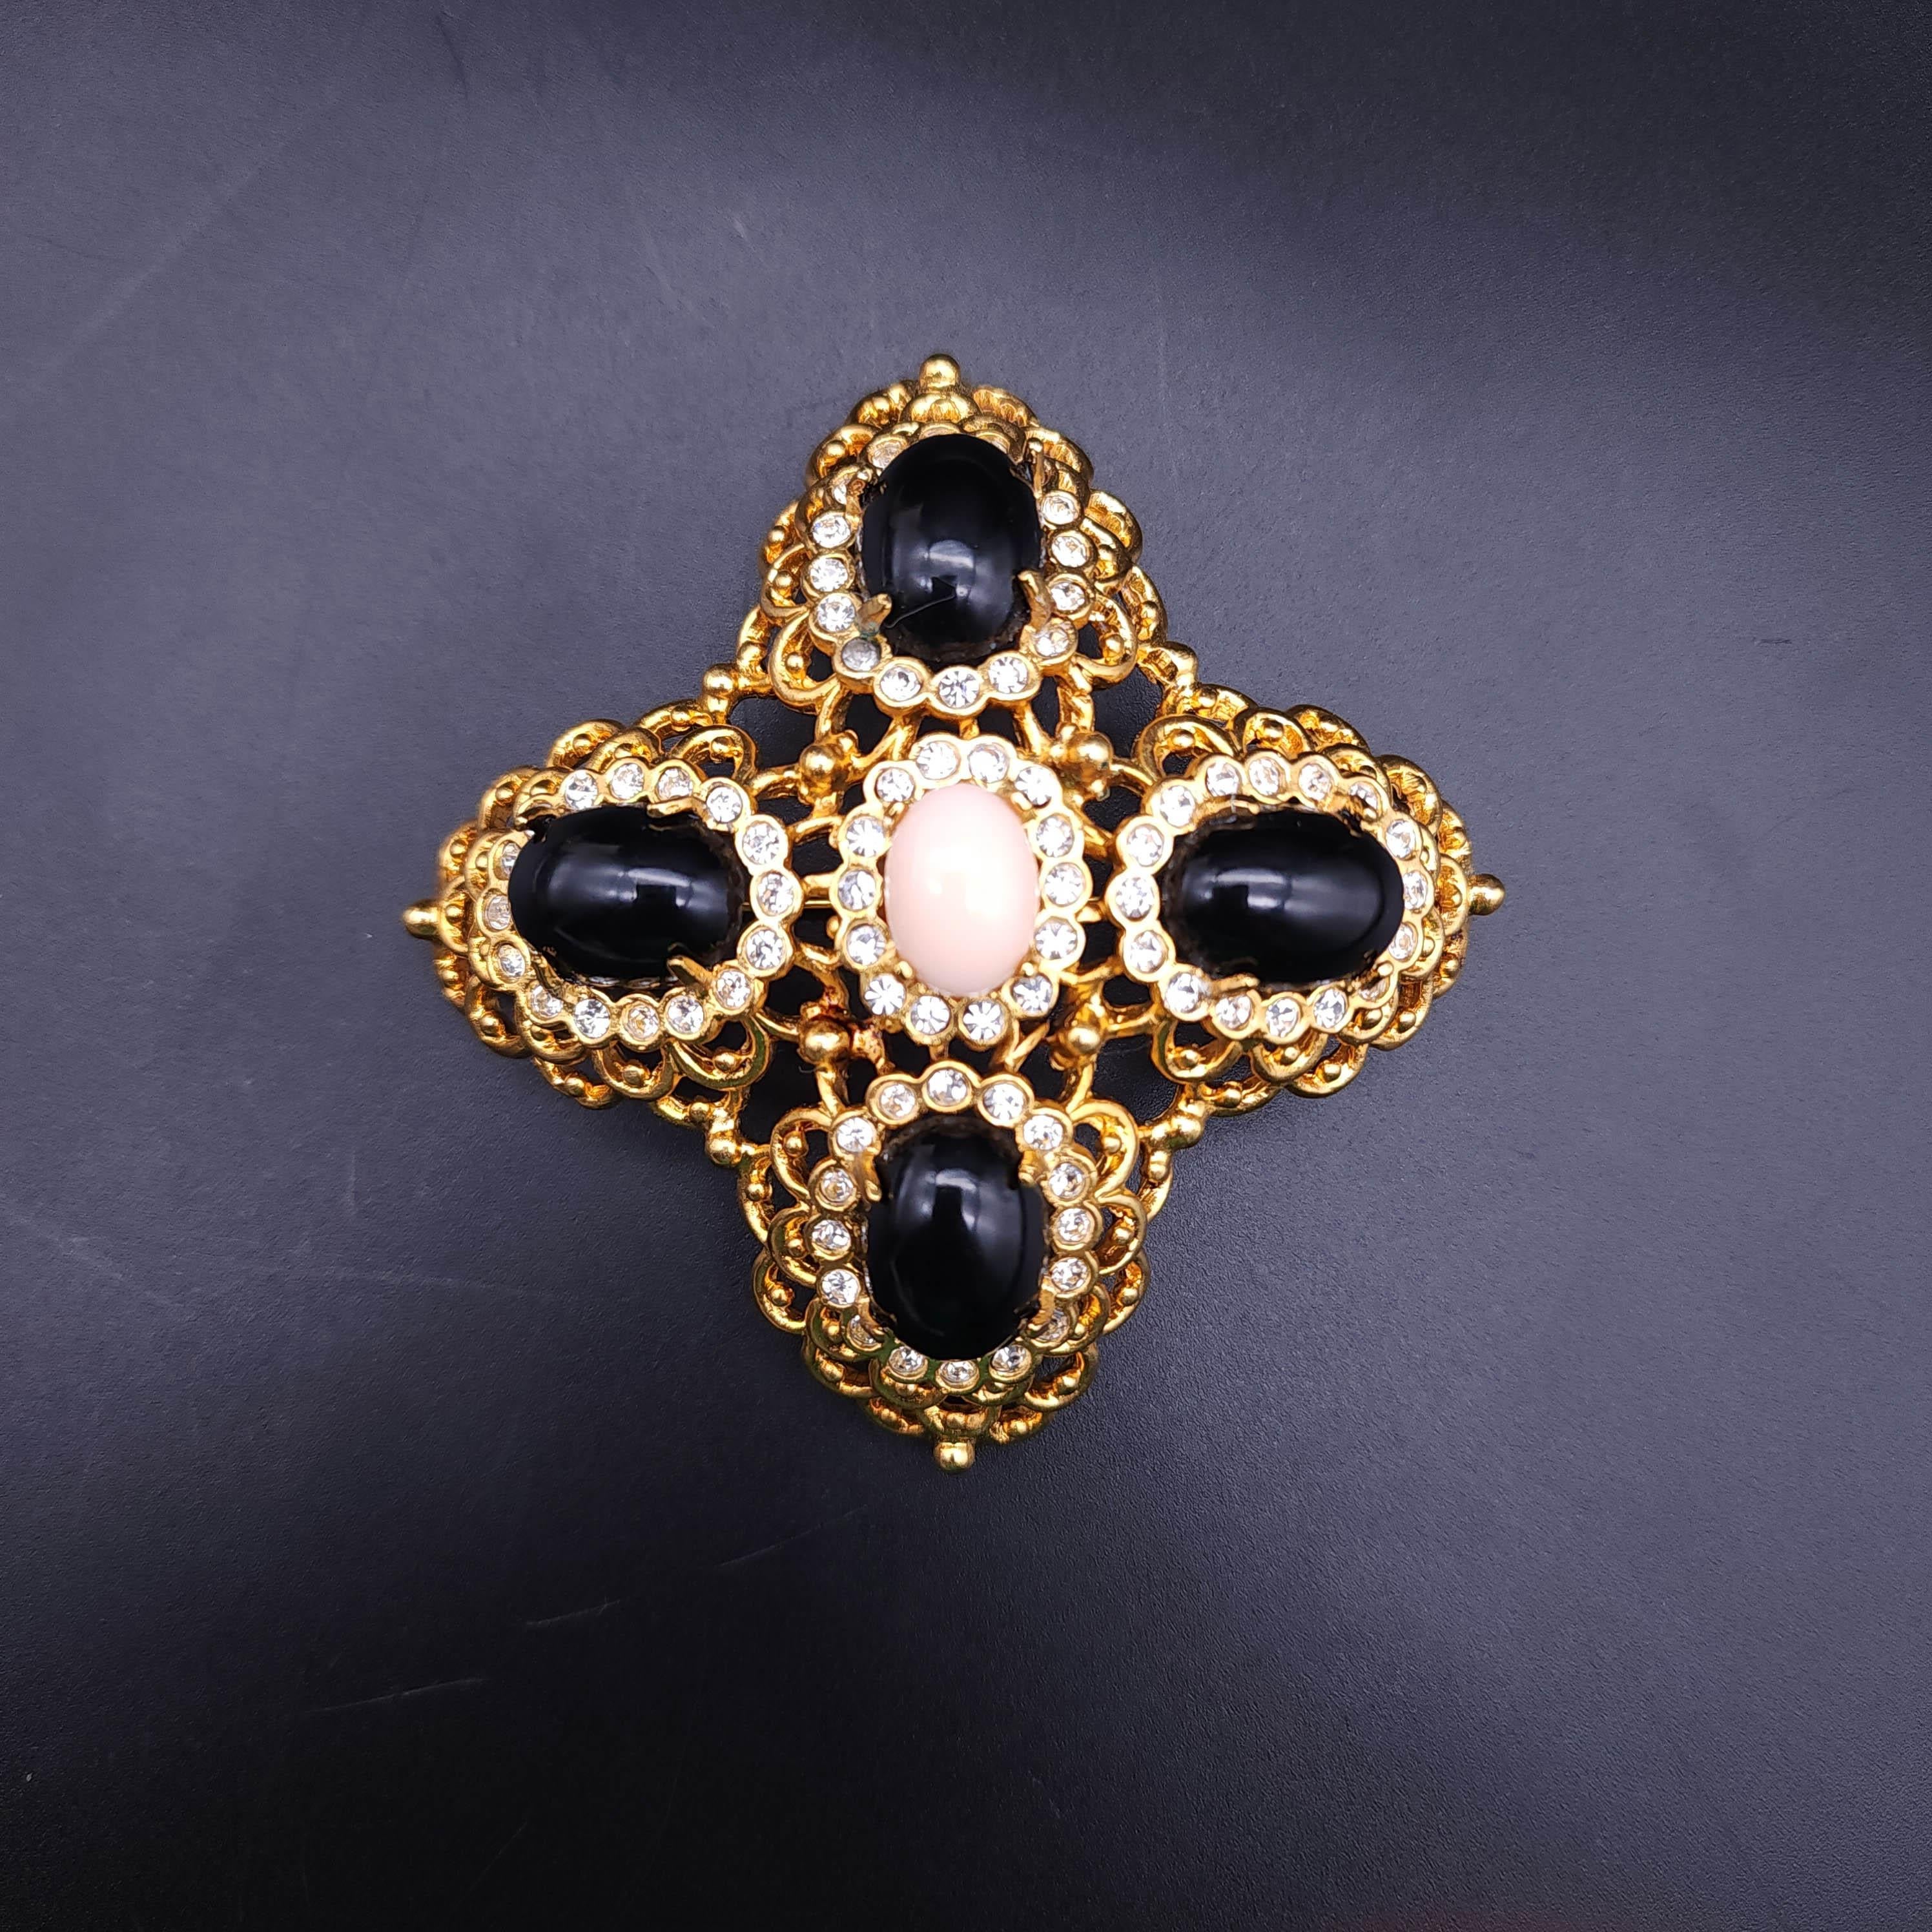 Modern Kenneth Jay Lane Cabochon Cross Pin Brooch, Black & Pink, Gold Finish, Crystals For Sale